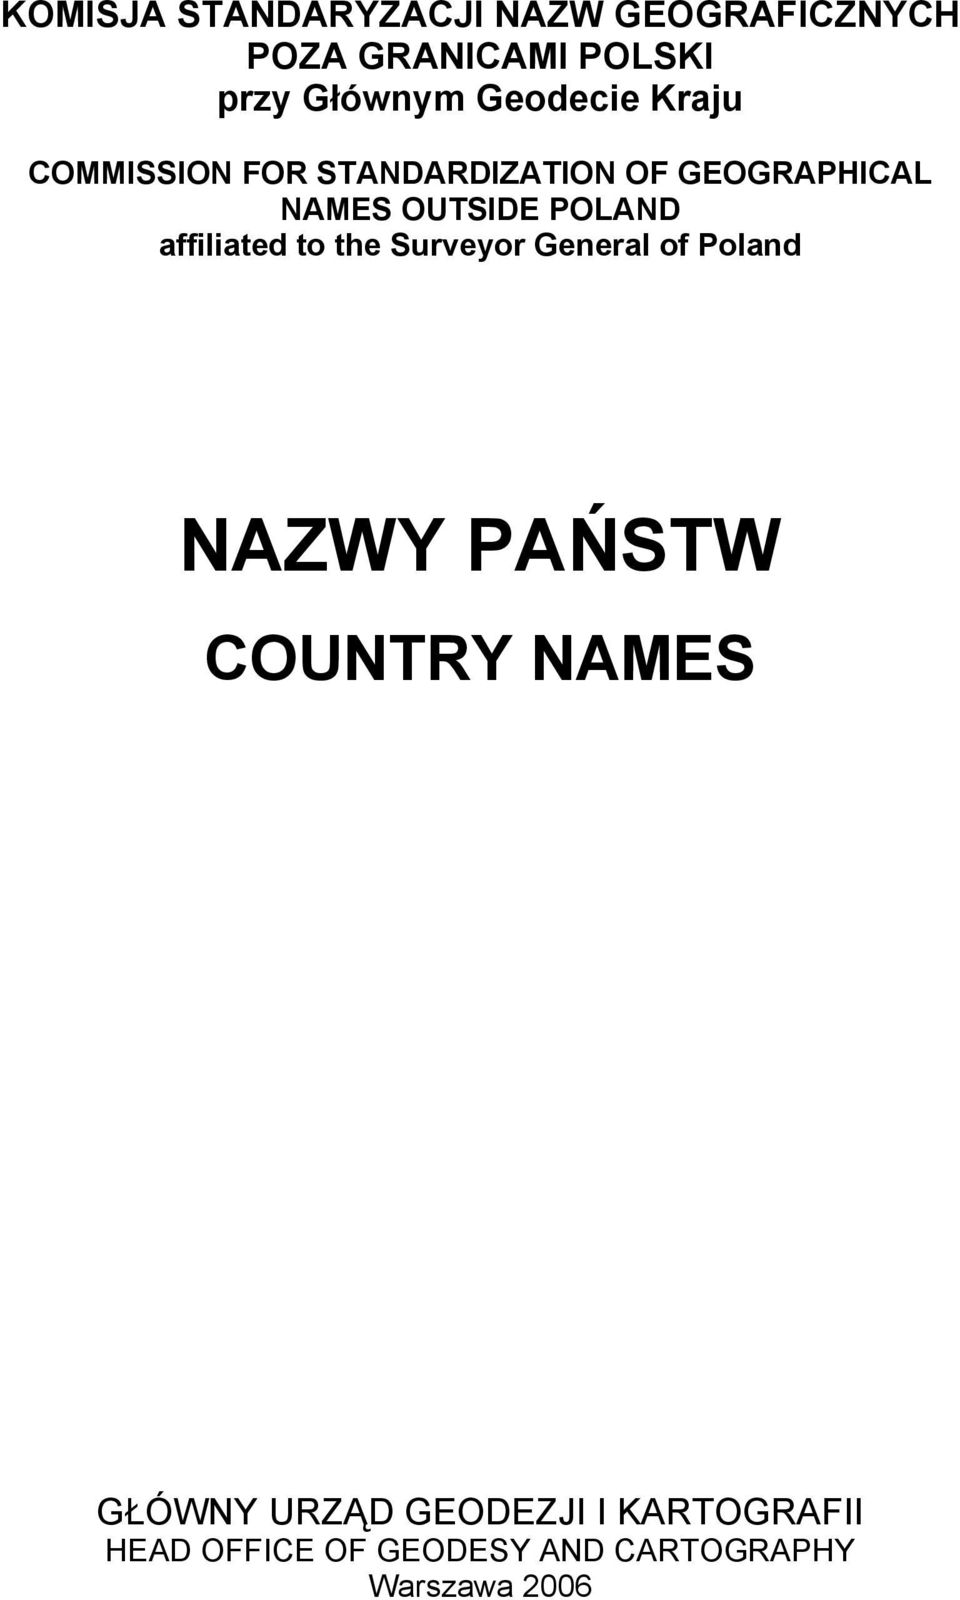 POLAND affiliated to the Surveyor General of Poland NAZWY PAŃSTW COUNTRY NAMES